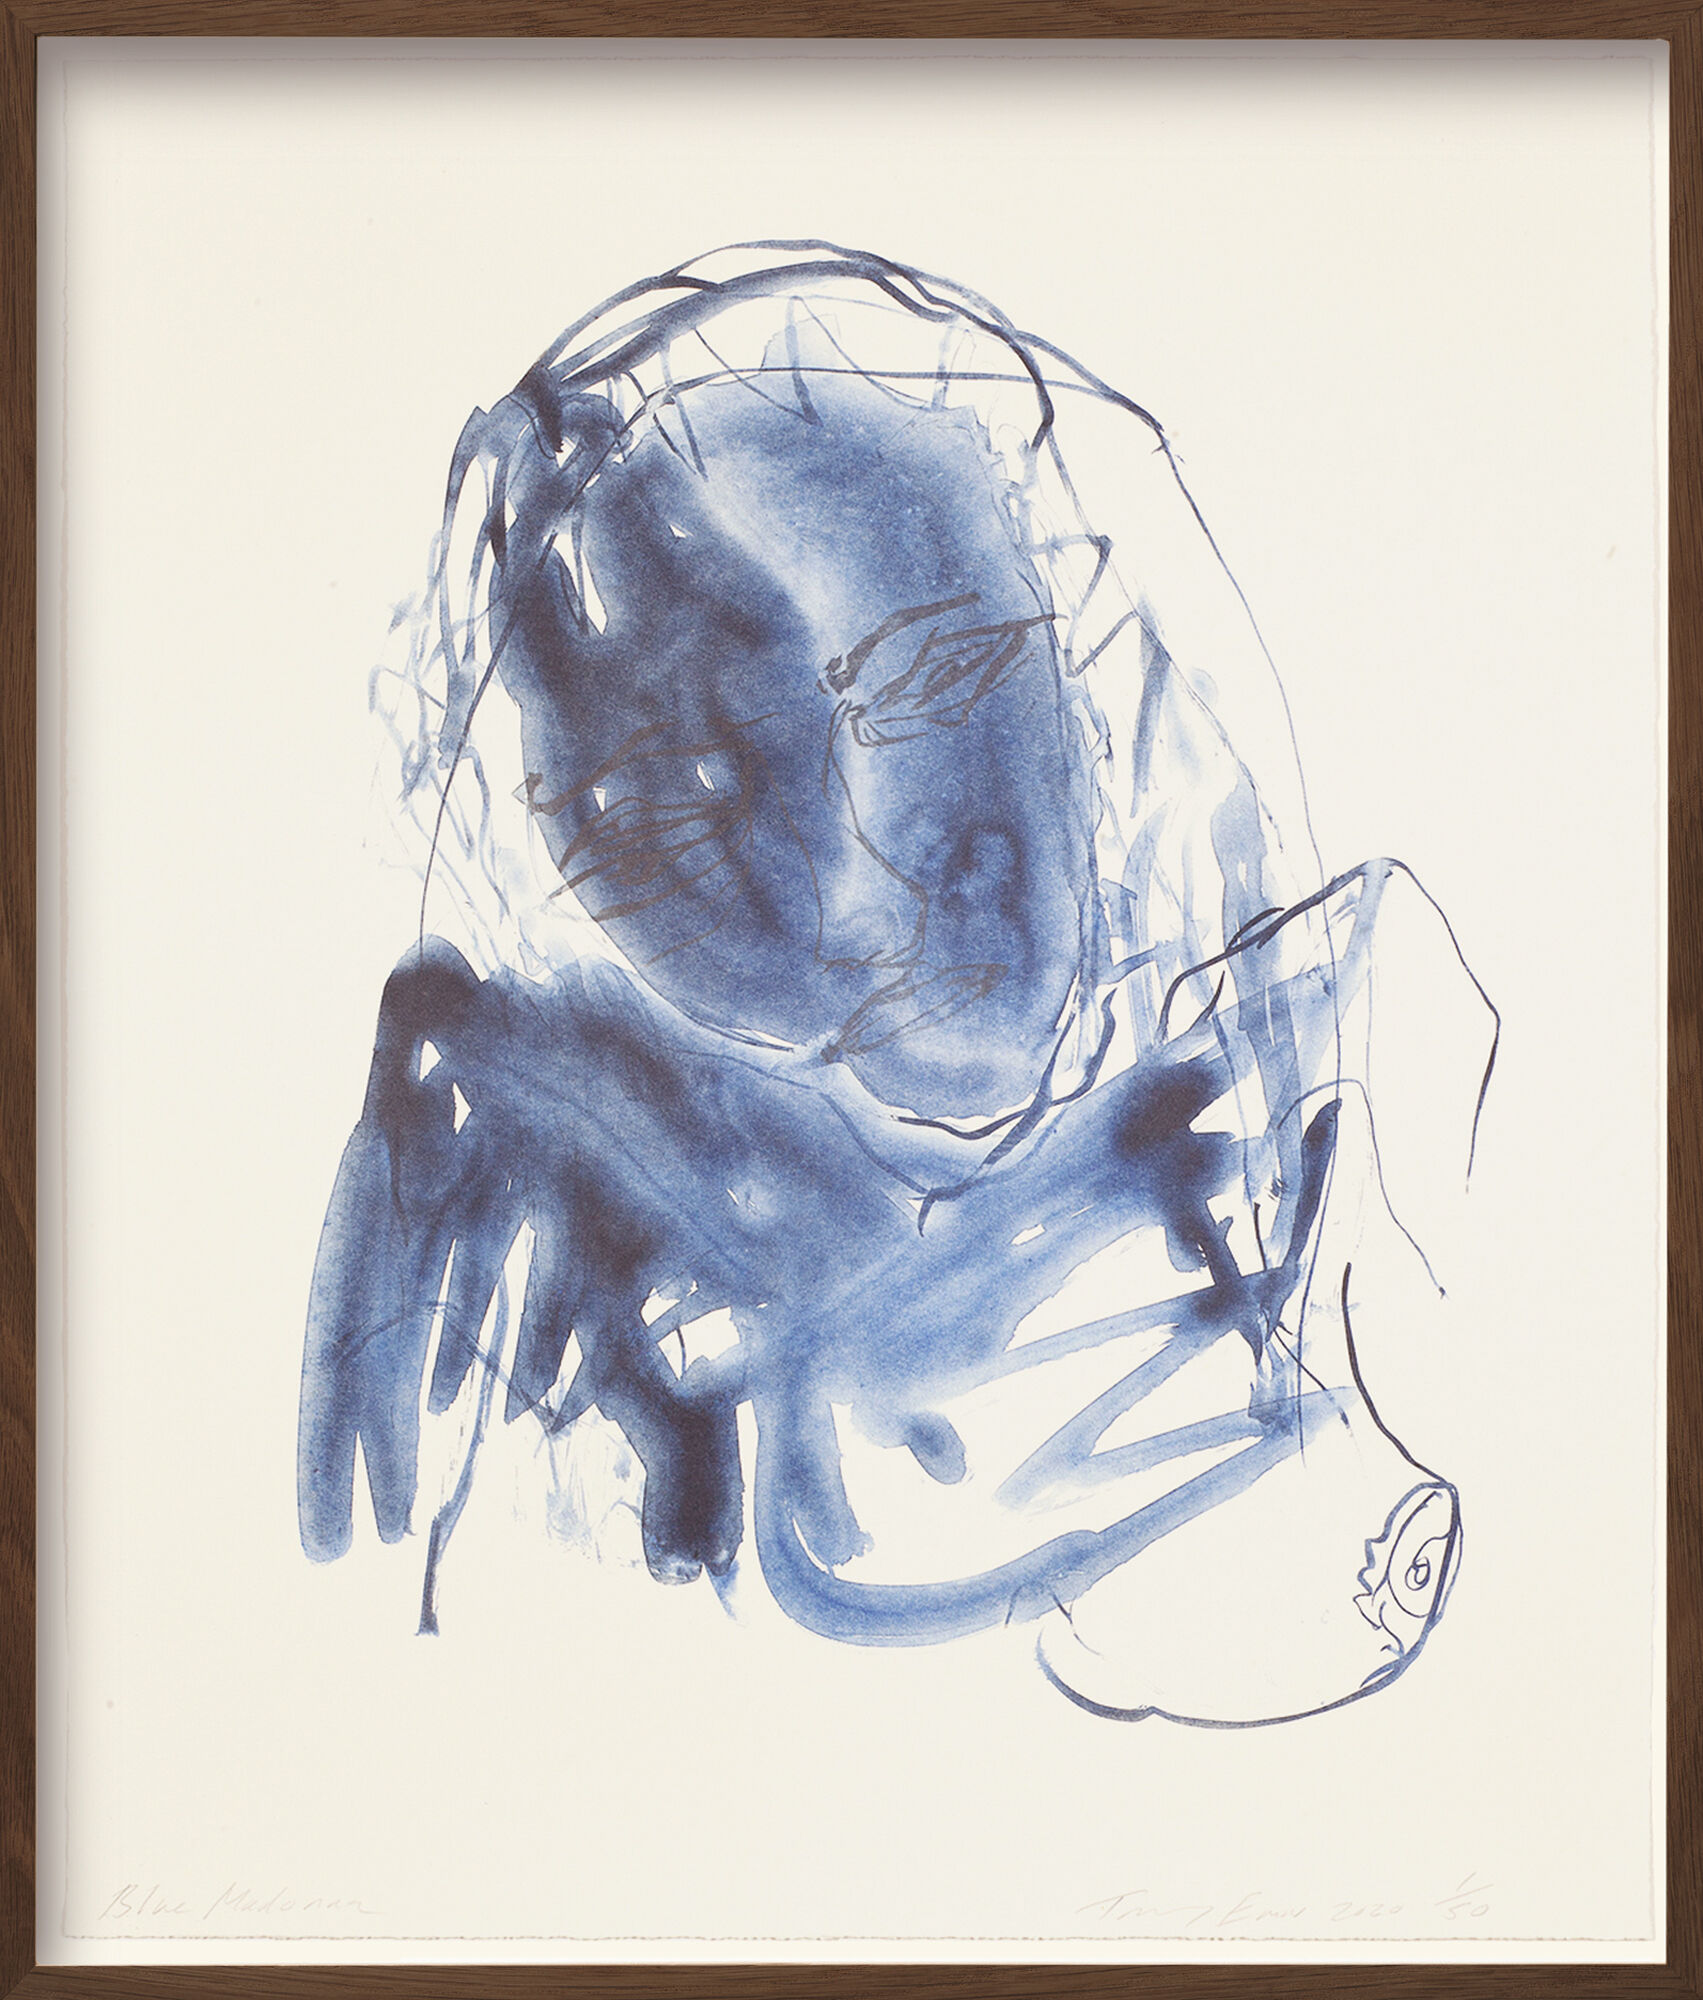 Picture "Blue Madonna" (2020) by Tracey Emin